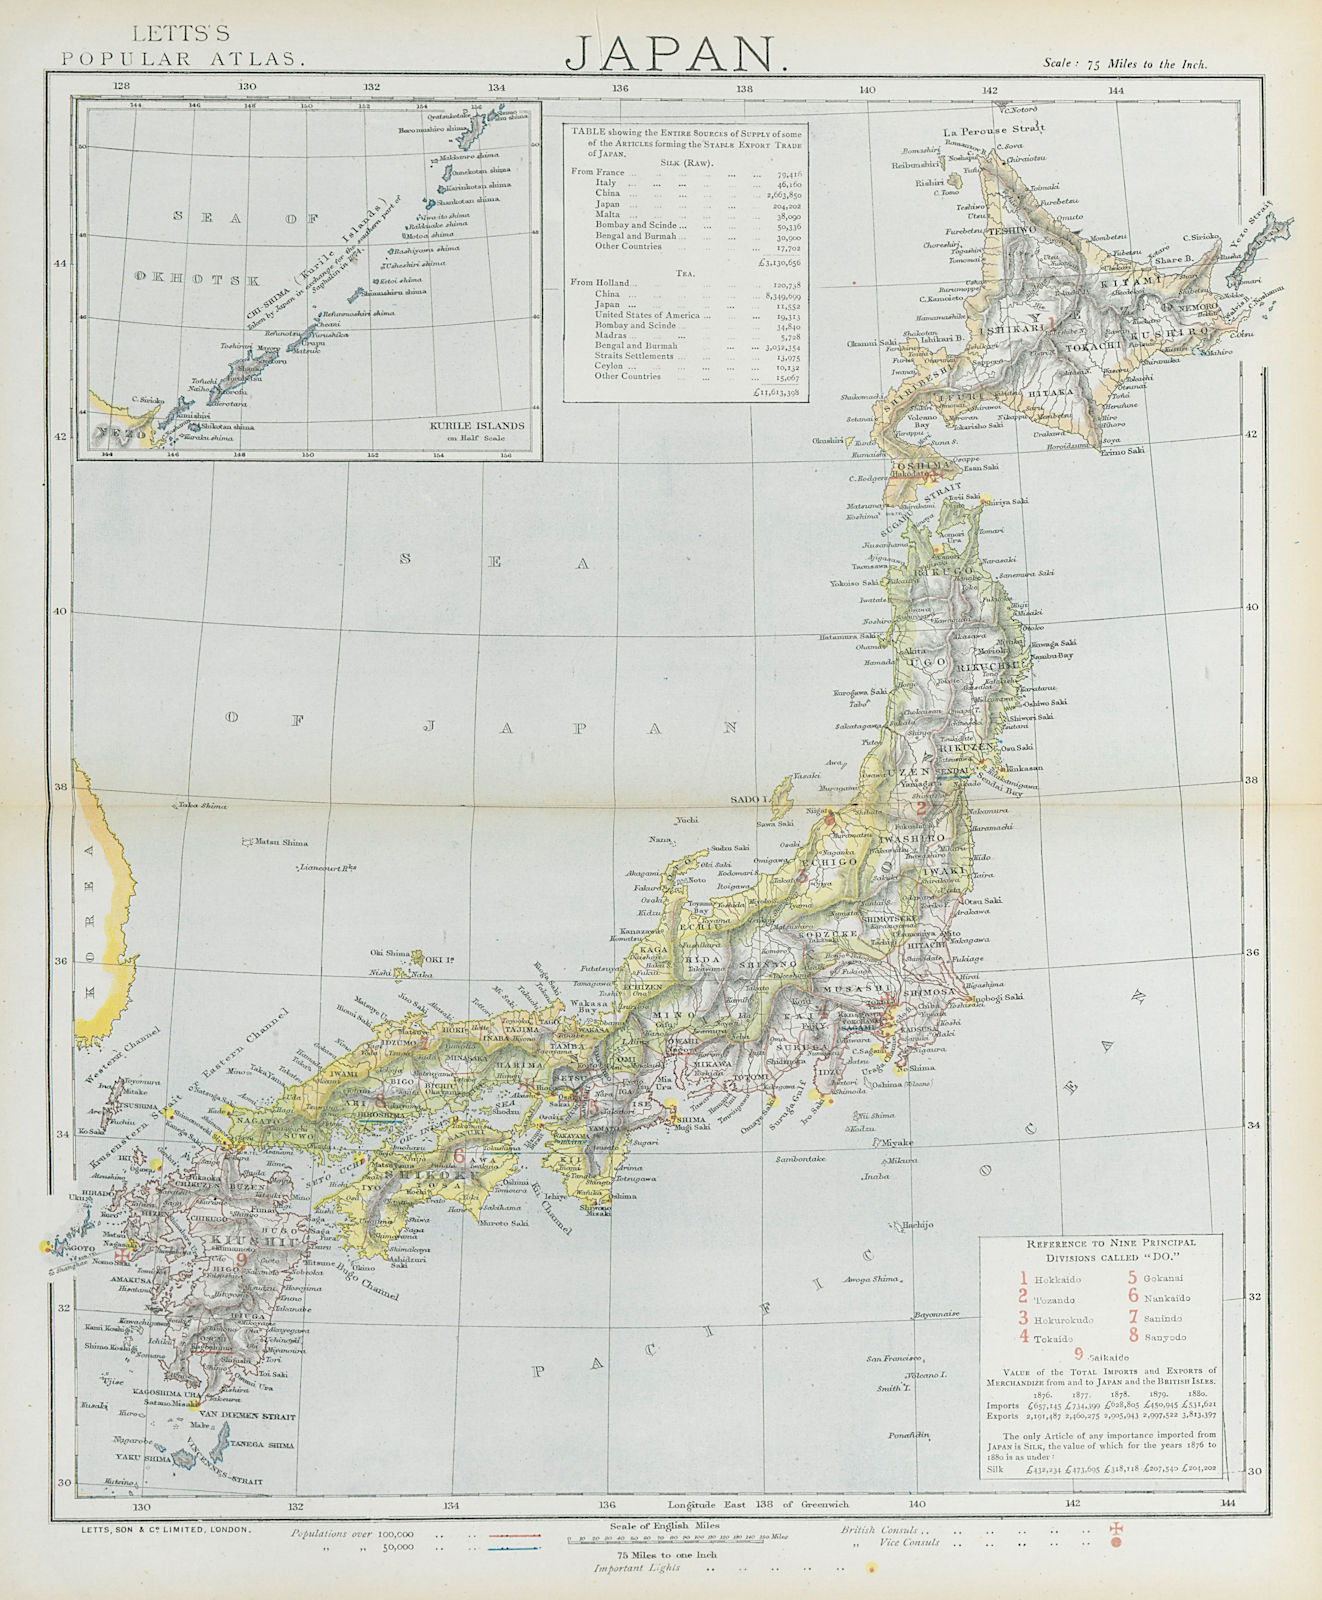 Associate Product JAPAN. Lighthouses & British Consuls. Silk & tea exports. LETTS 1883 old map